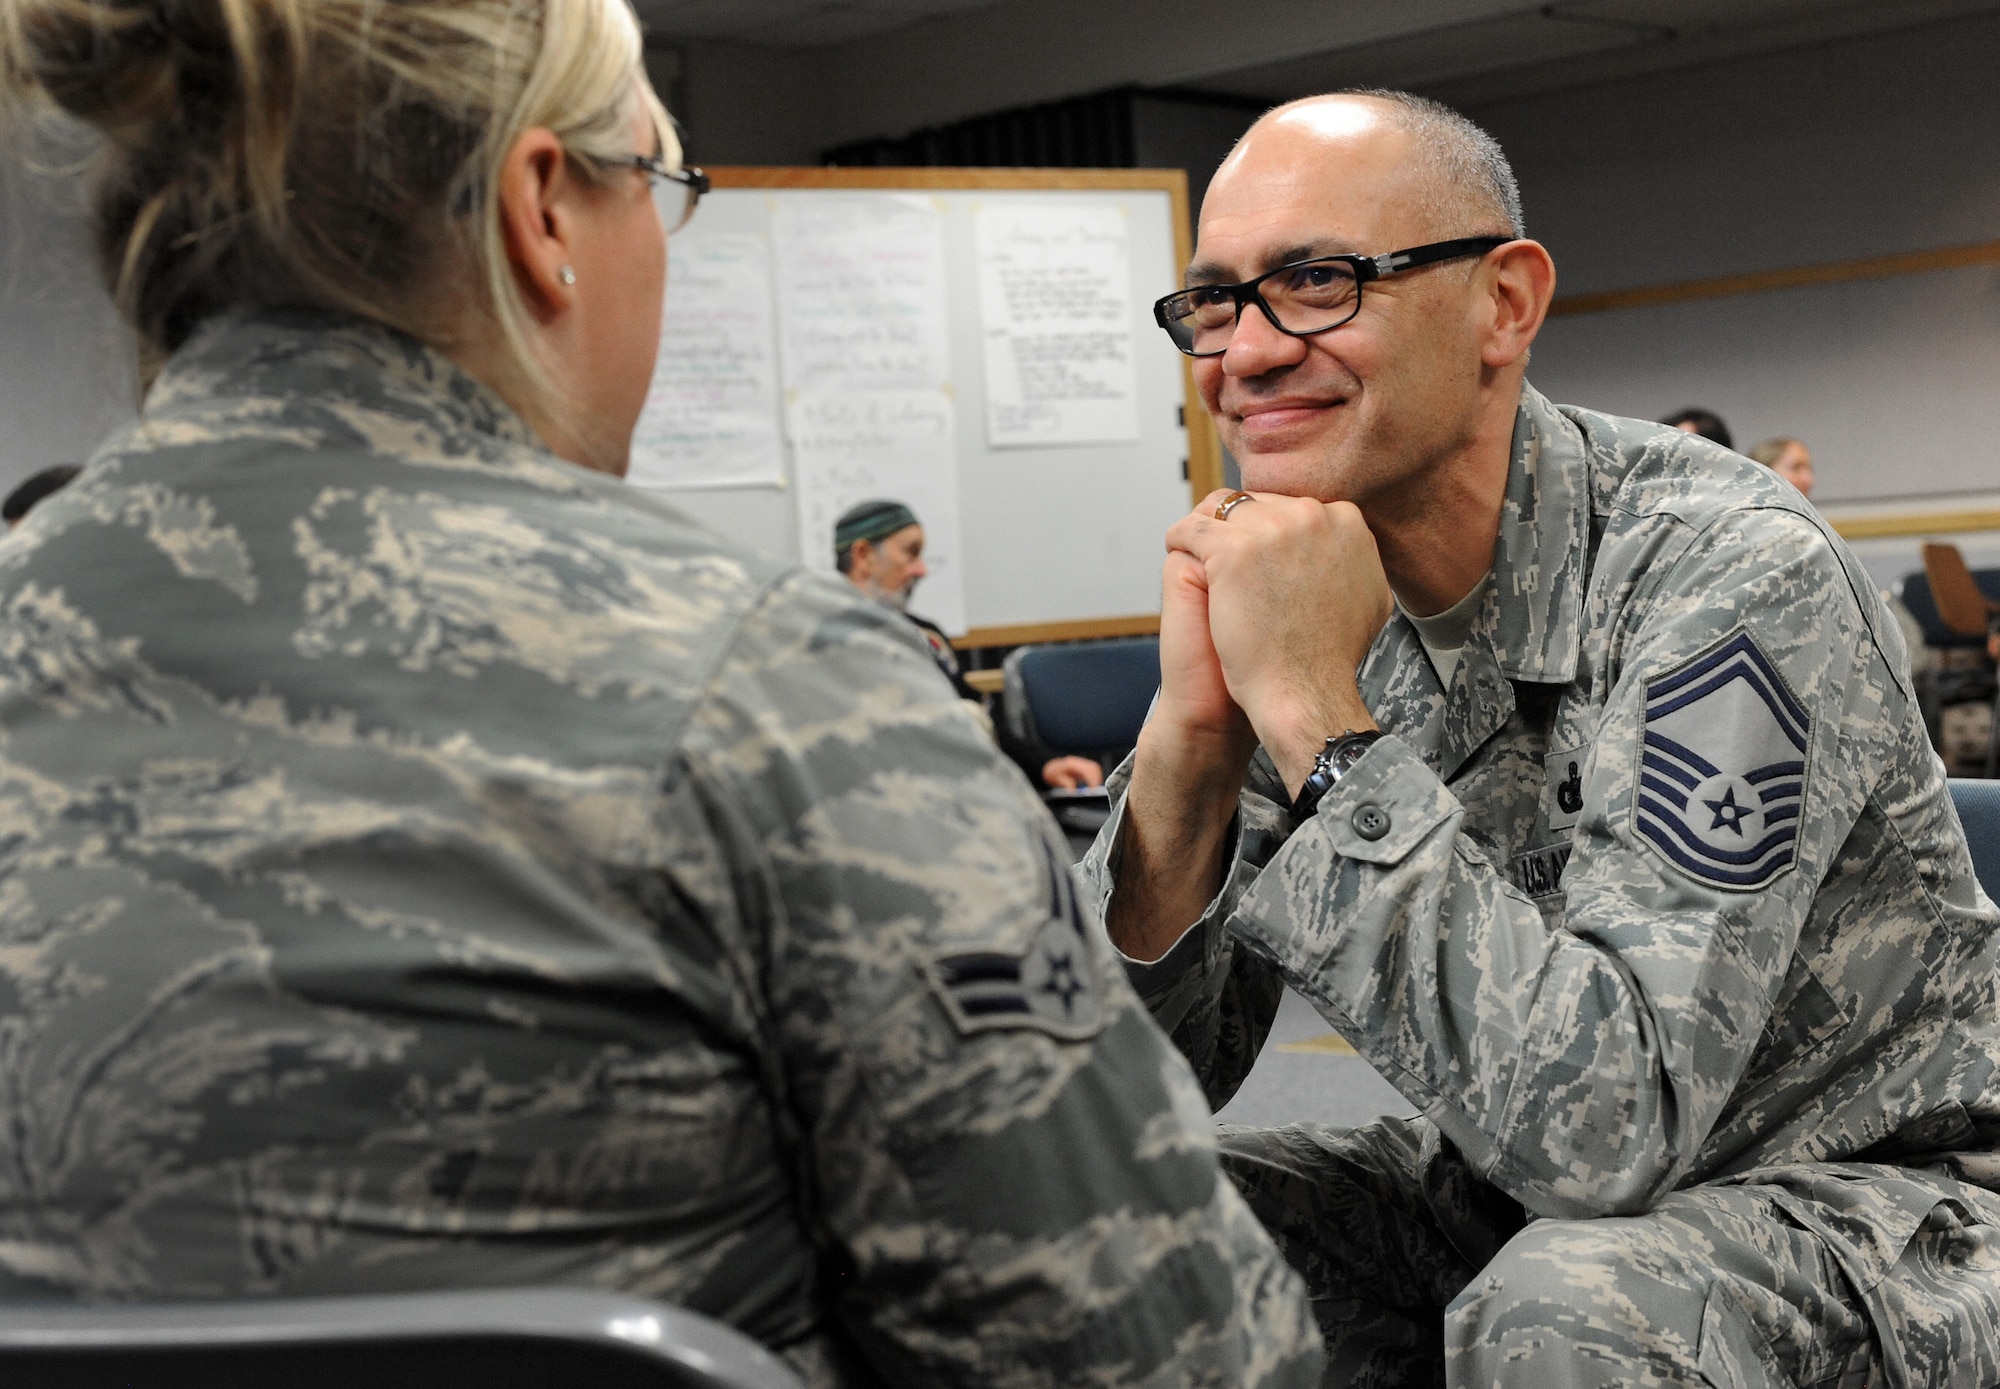 Oregon Air National Guard Senior Master Sgt. David Brunstad, right, quietly participates in a compassionate listing exercise with Airman 1st Class Michelle Johnson, left, during a meeting of the 142nd Fighter Wing’s Diversity and Inclusion Counsel, Feb. 8, 2015, Portland Air National Guard Base, Ore. The Diversity and Inclusion Counsel meets during Unit Training Assembly weekends to help develop the total force crucial for mission success. (U.S. Air National Guard photo by Tech. Sgt. John Hughel, 142nd Fighter Wing Public Affairs/Released)